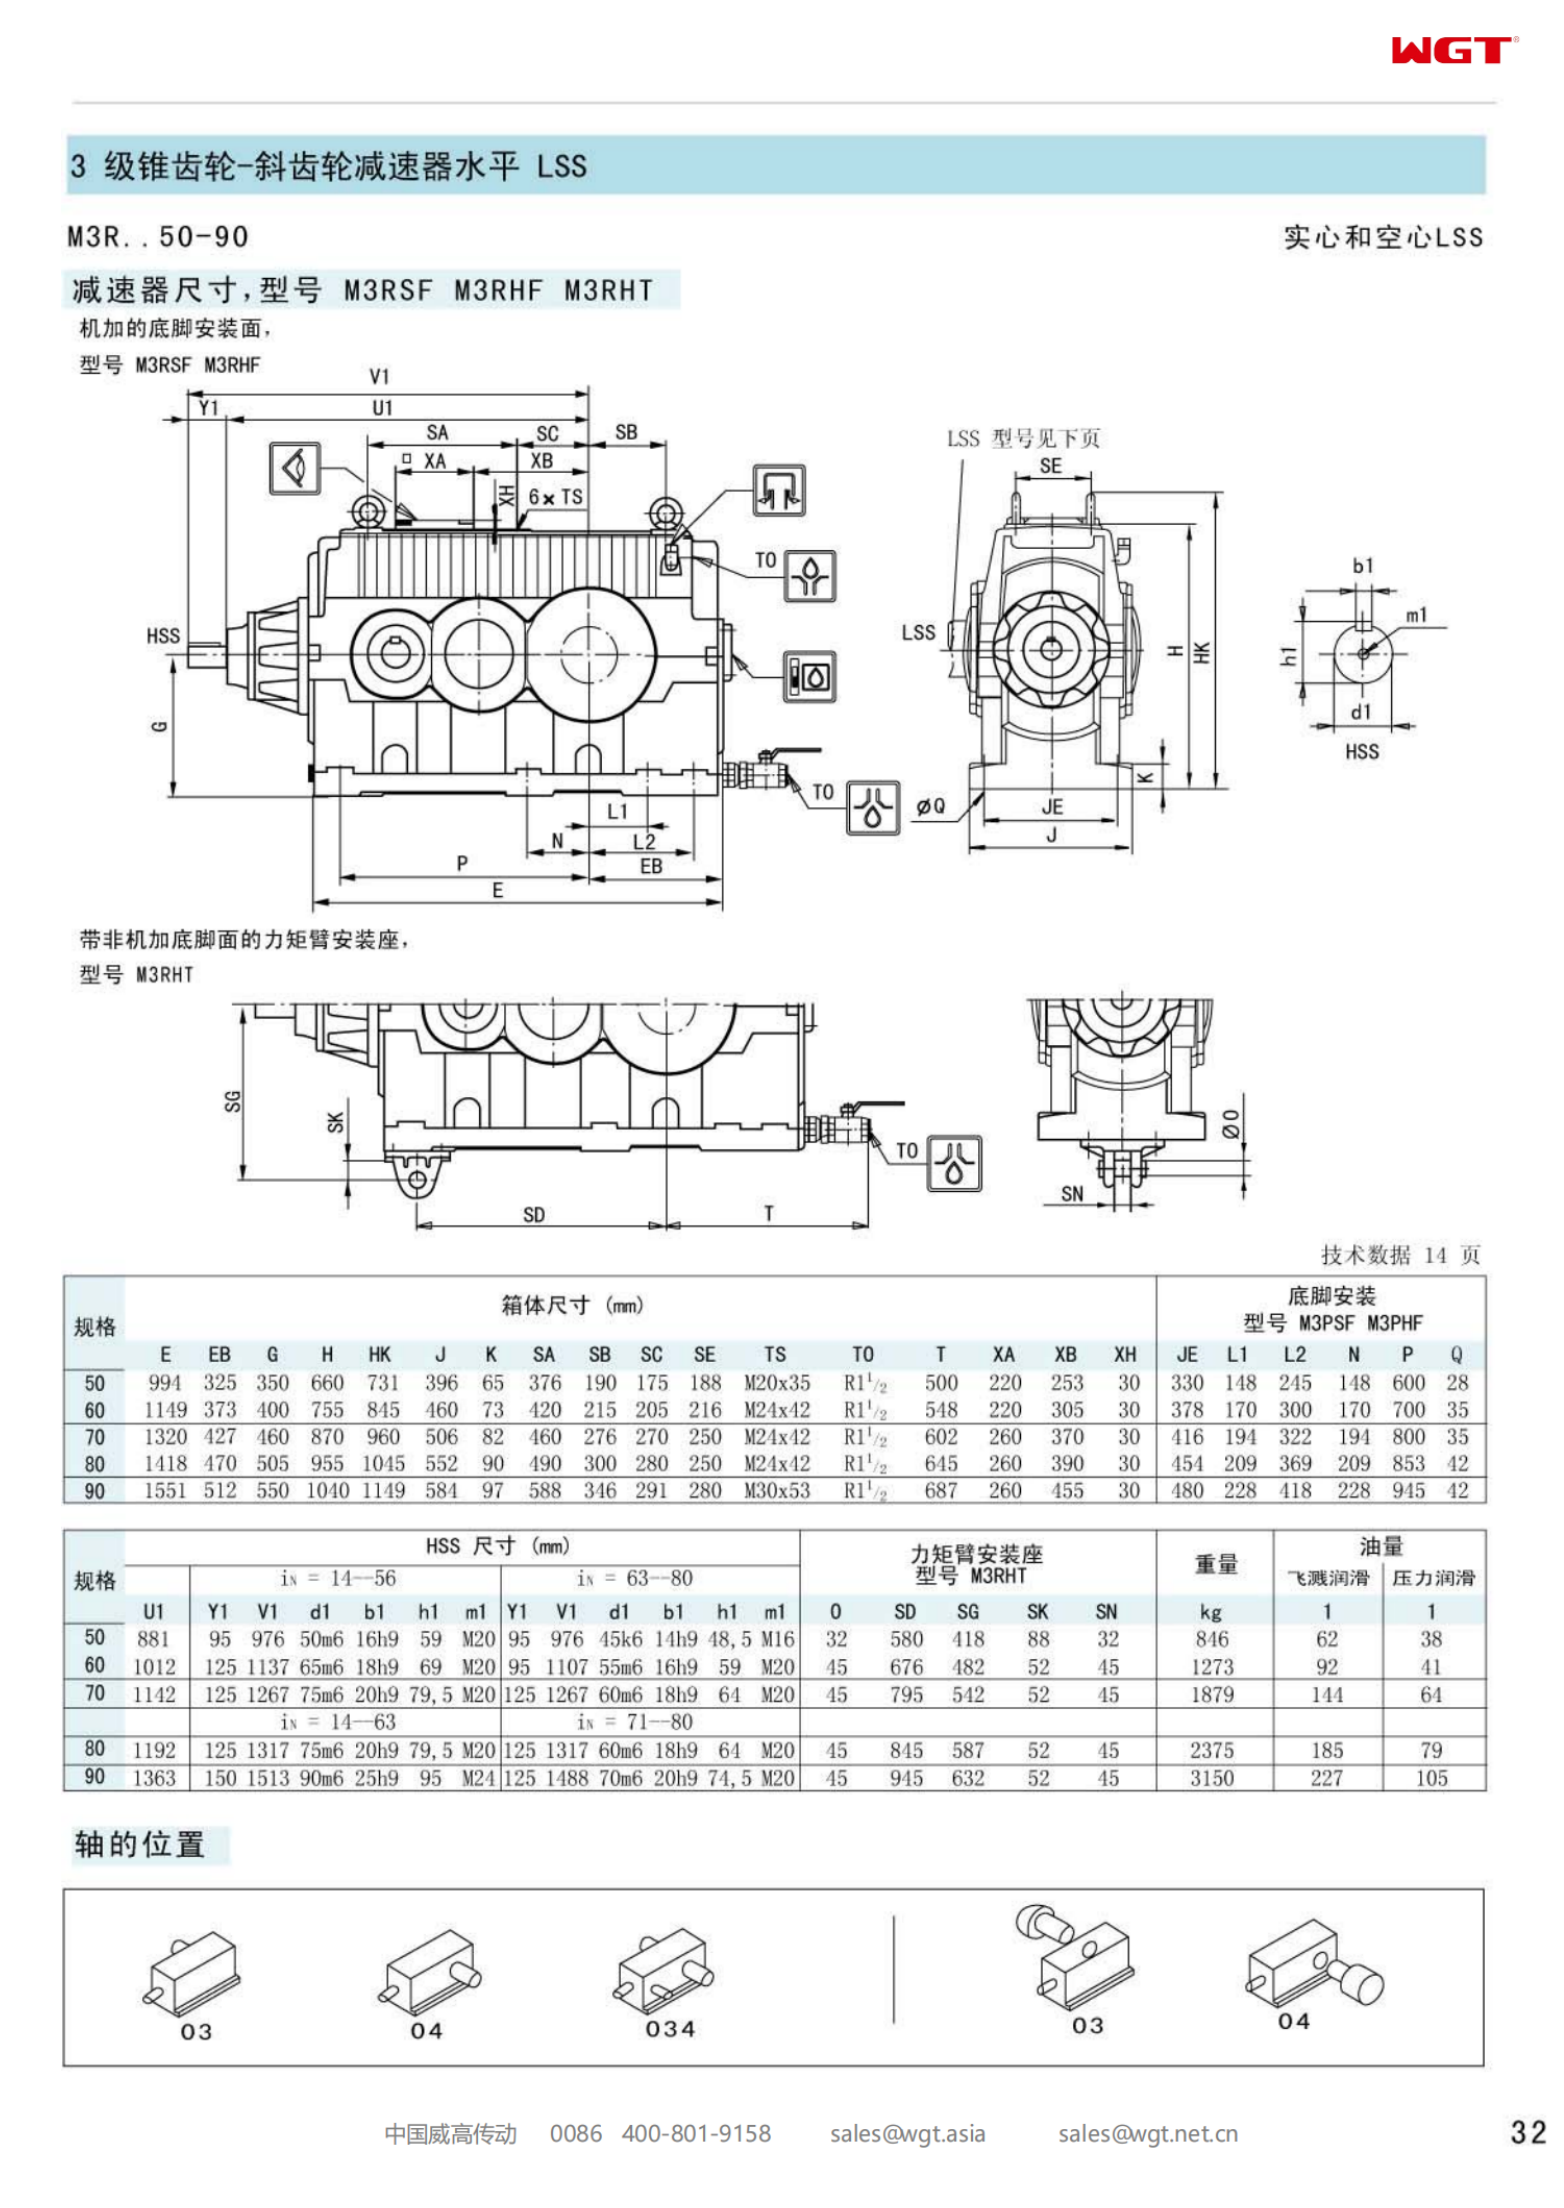 M3RSF70 Replace_SEW_M_Series Gearbox